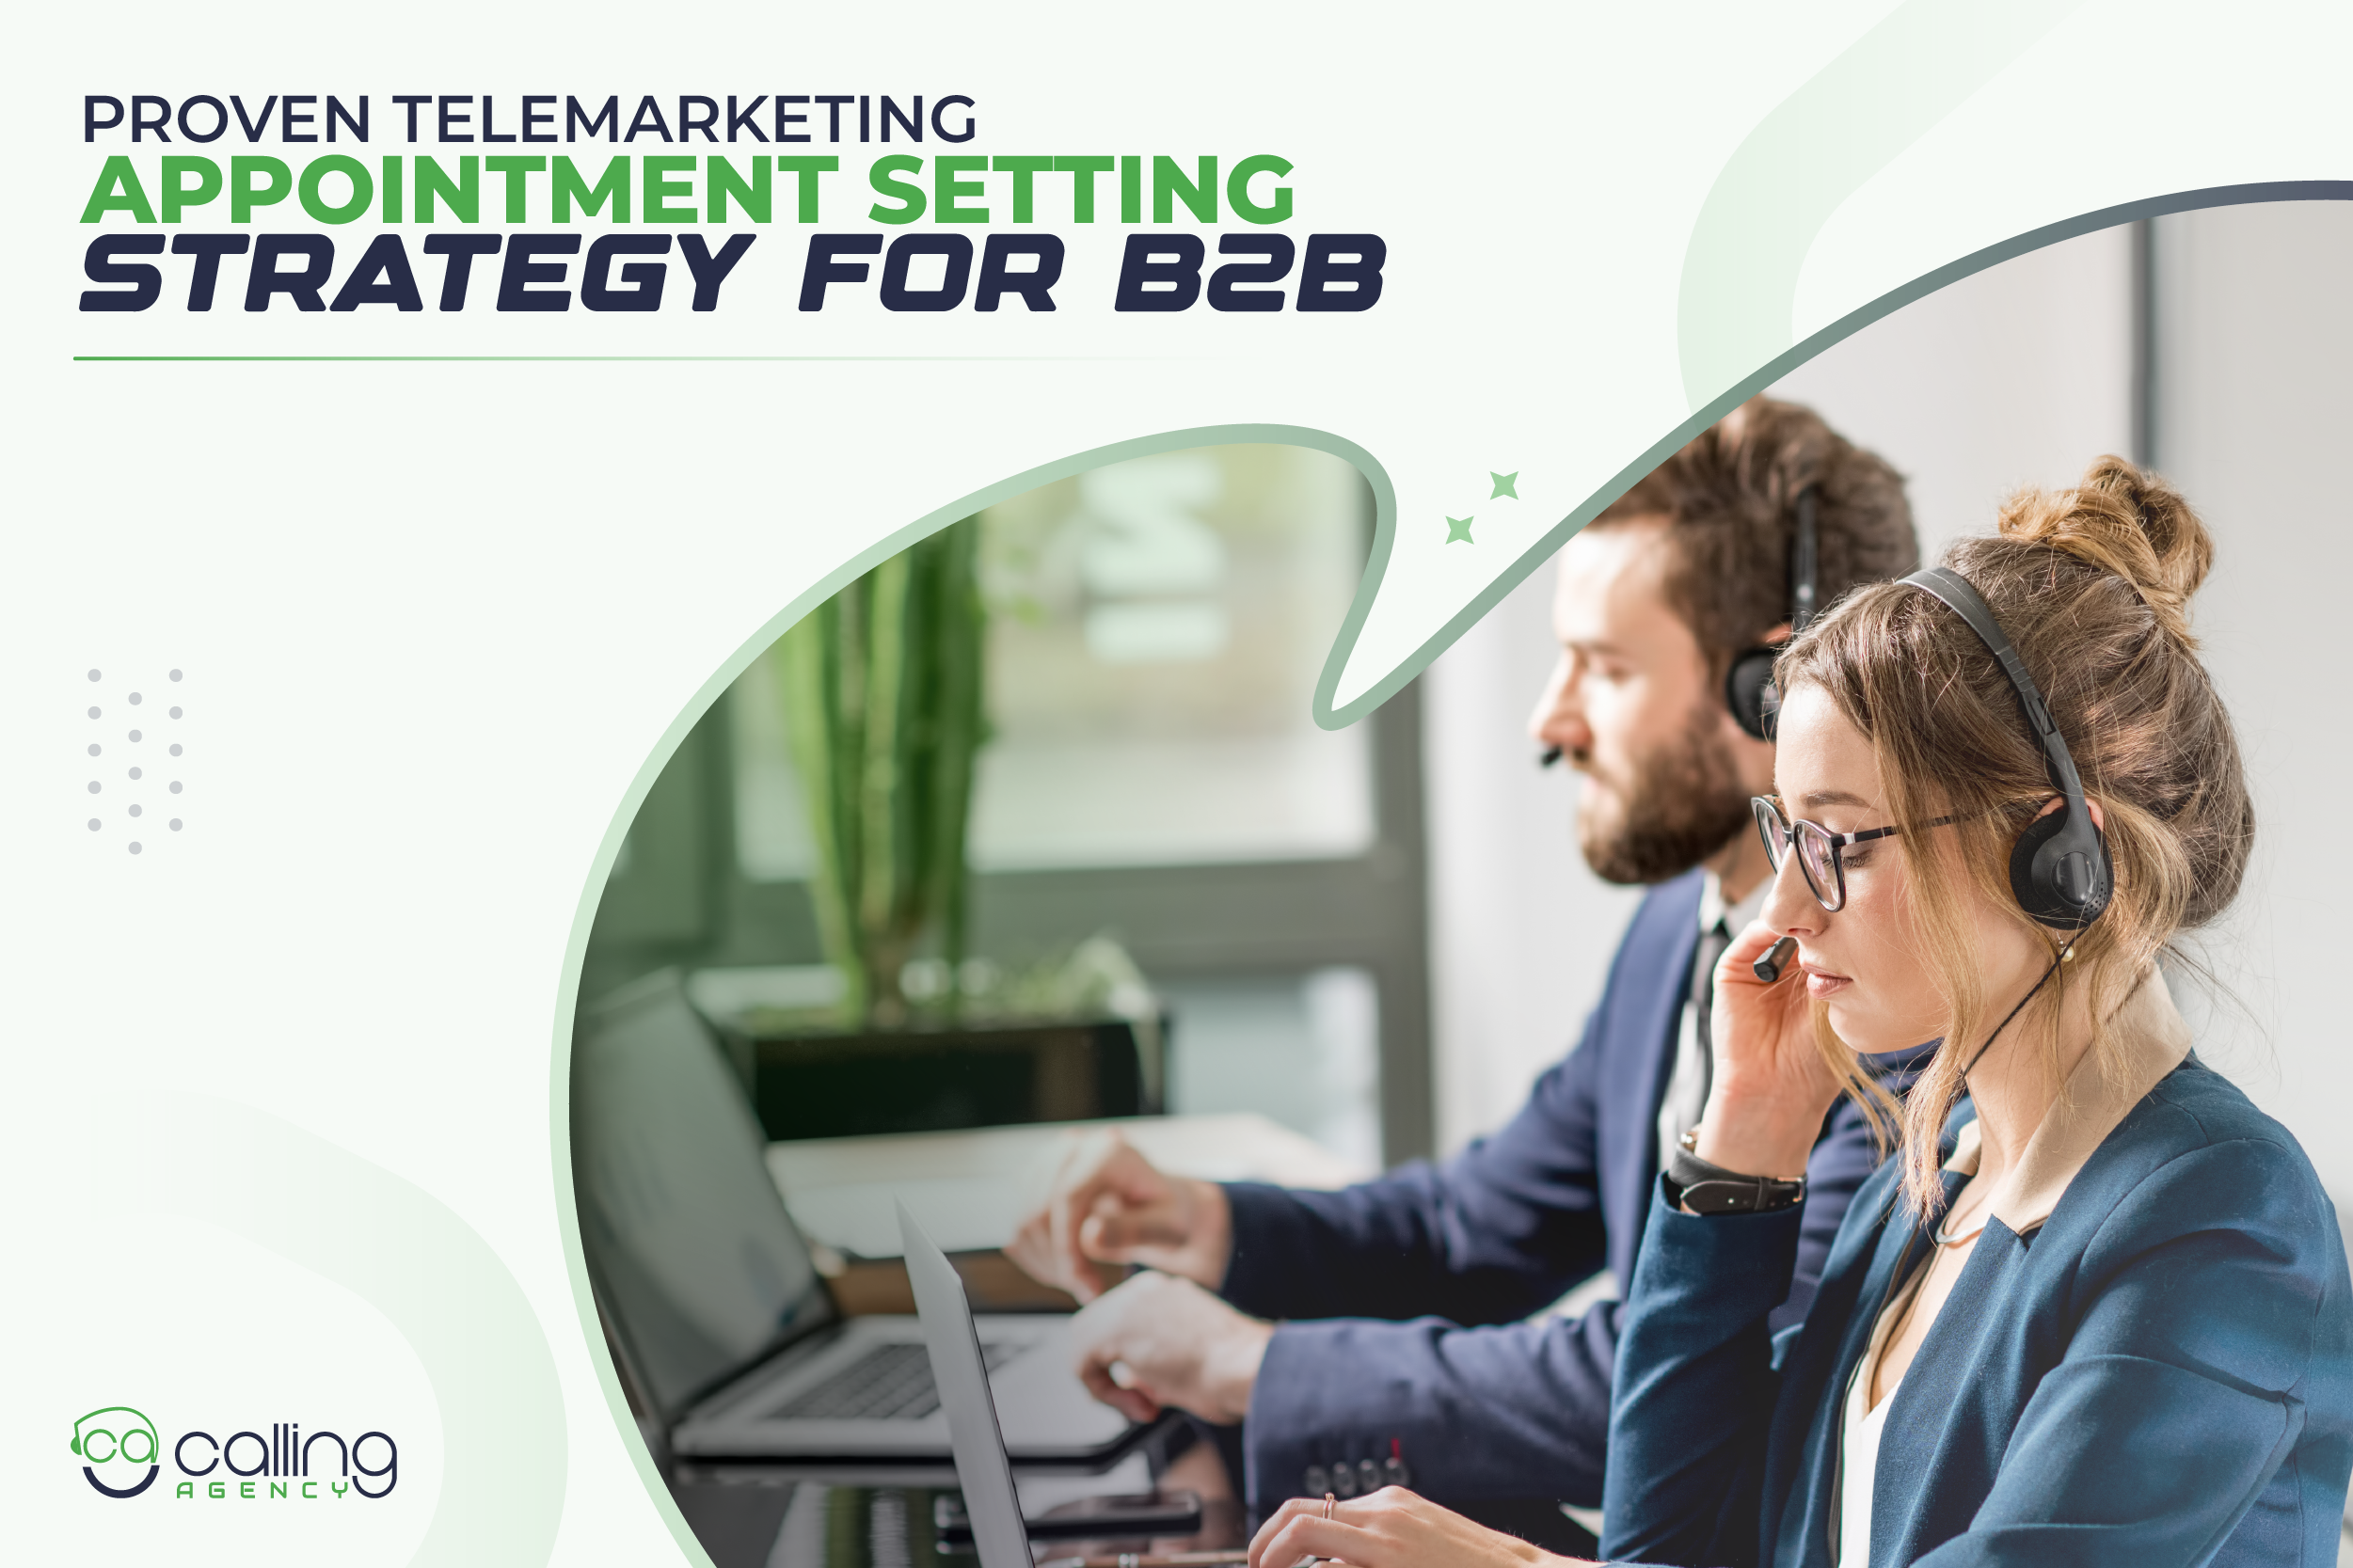 9 Proven Telemarketing Appointment Setting Strategy For B2B